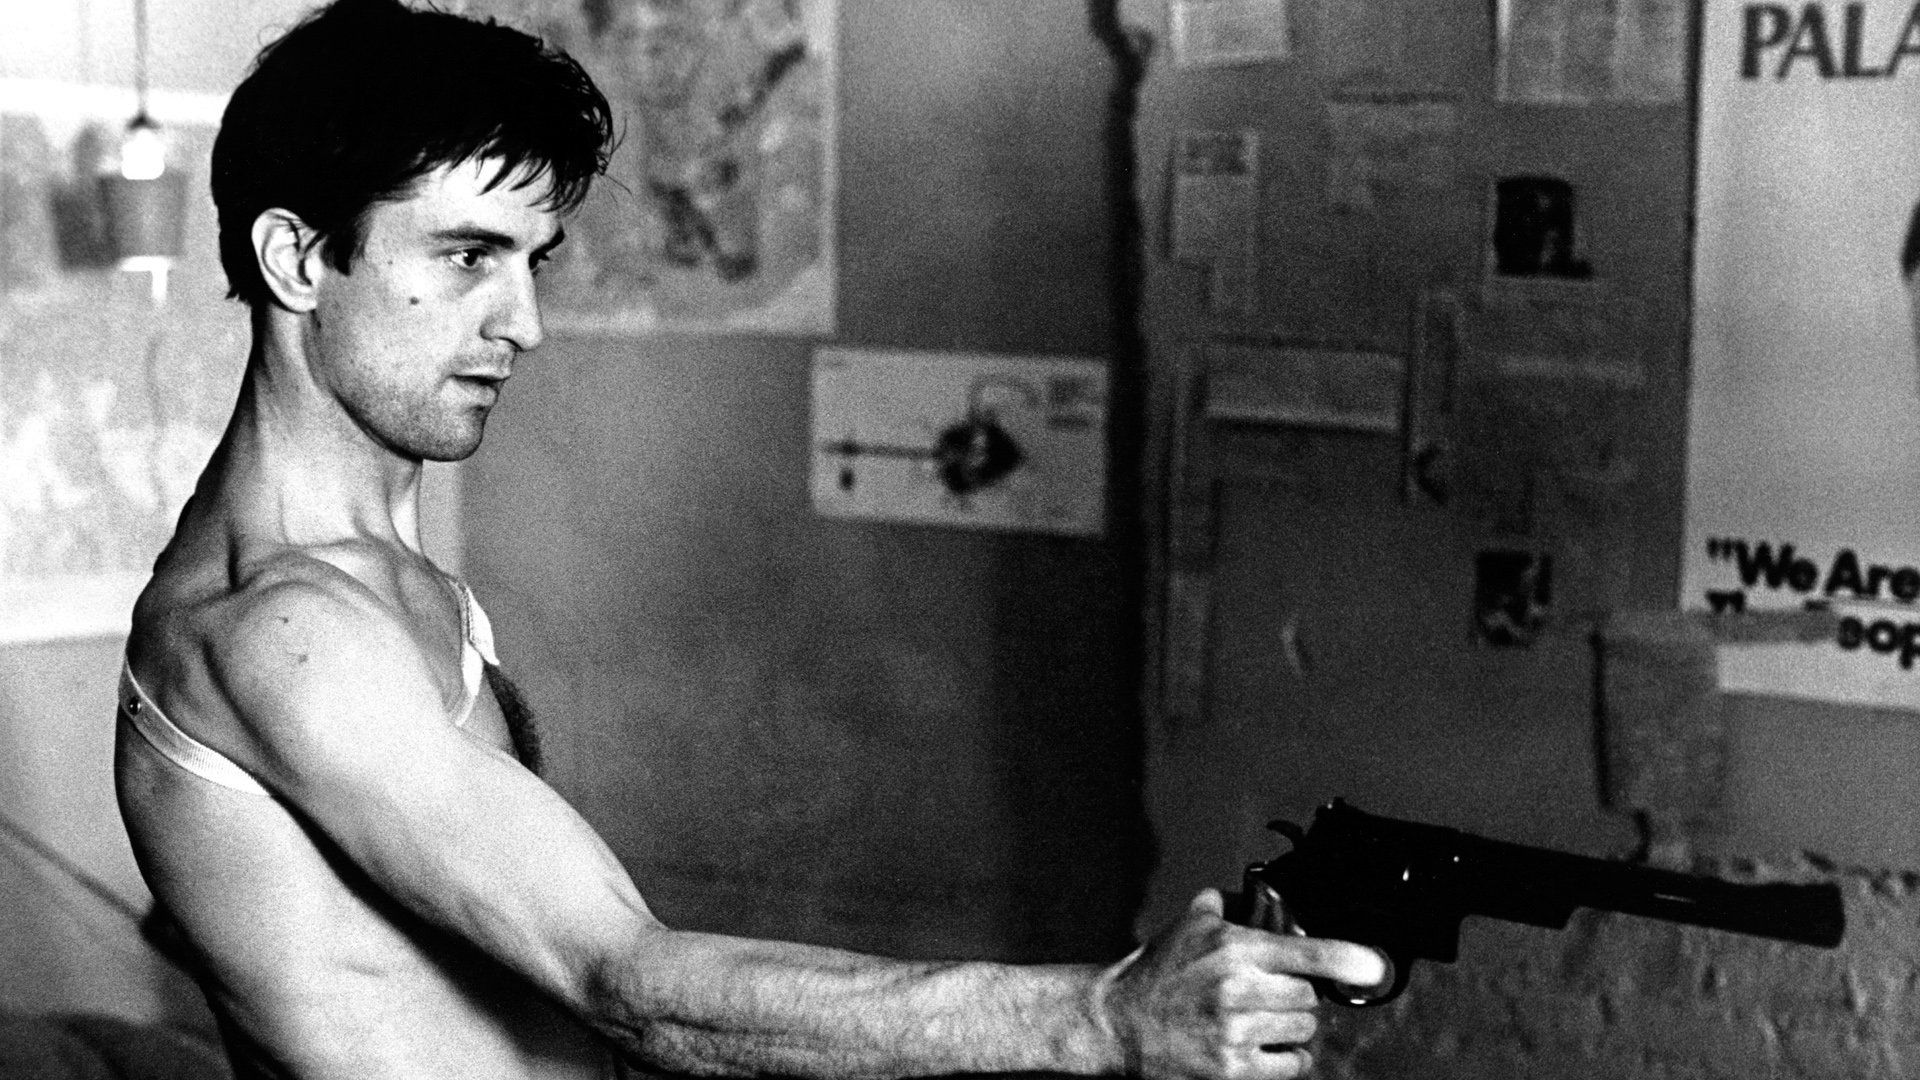 taxi driver wallpaper,barechested,arm,muscle,photography,chest